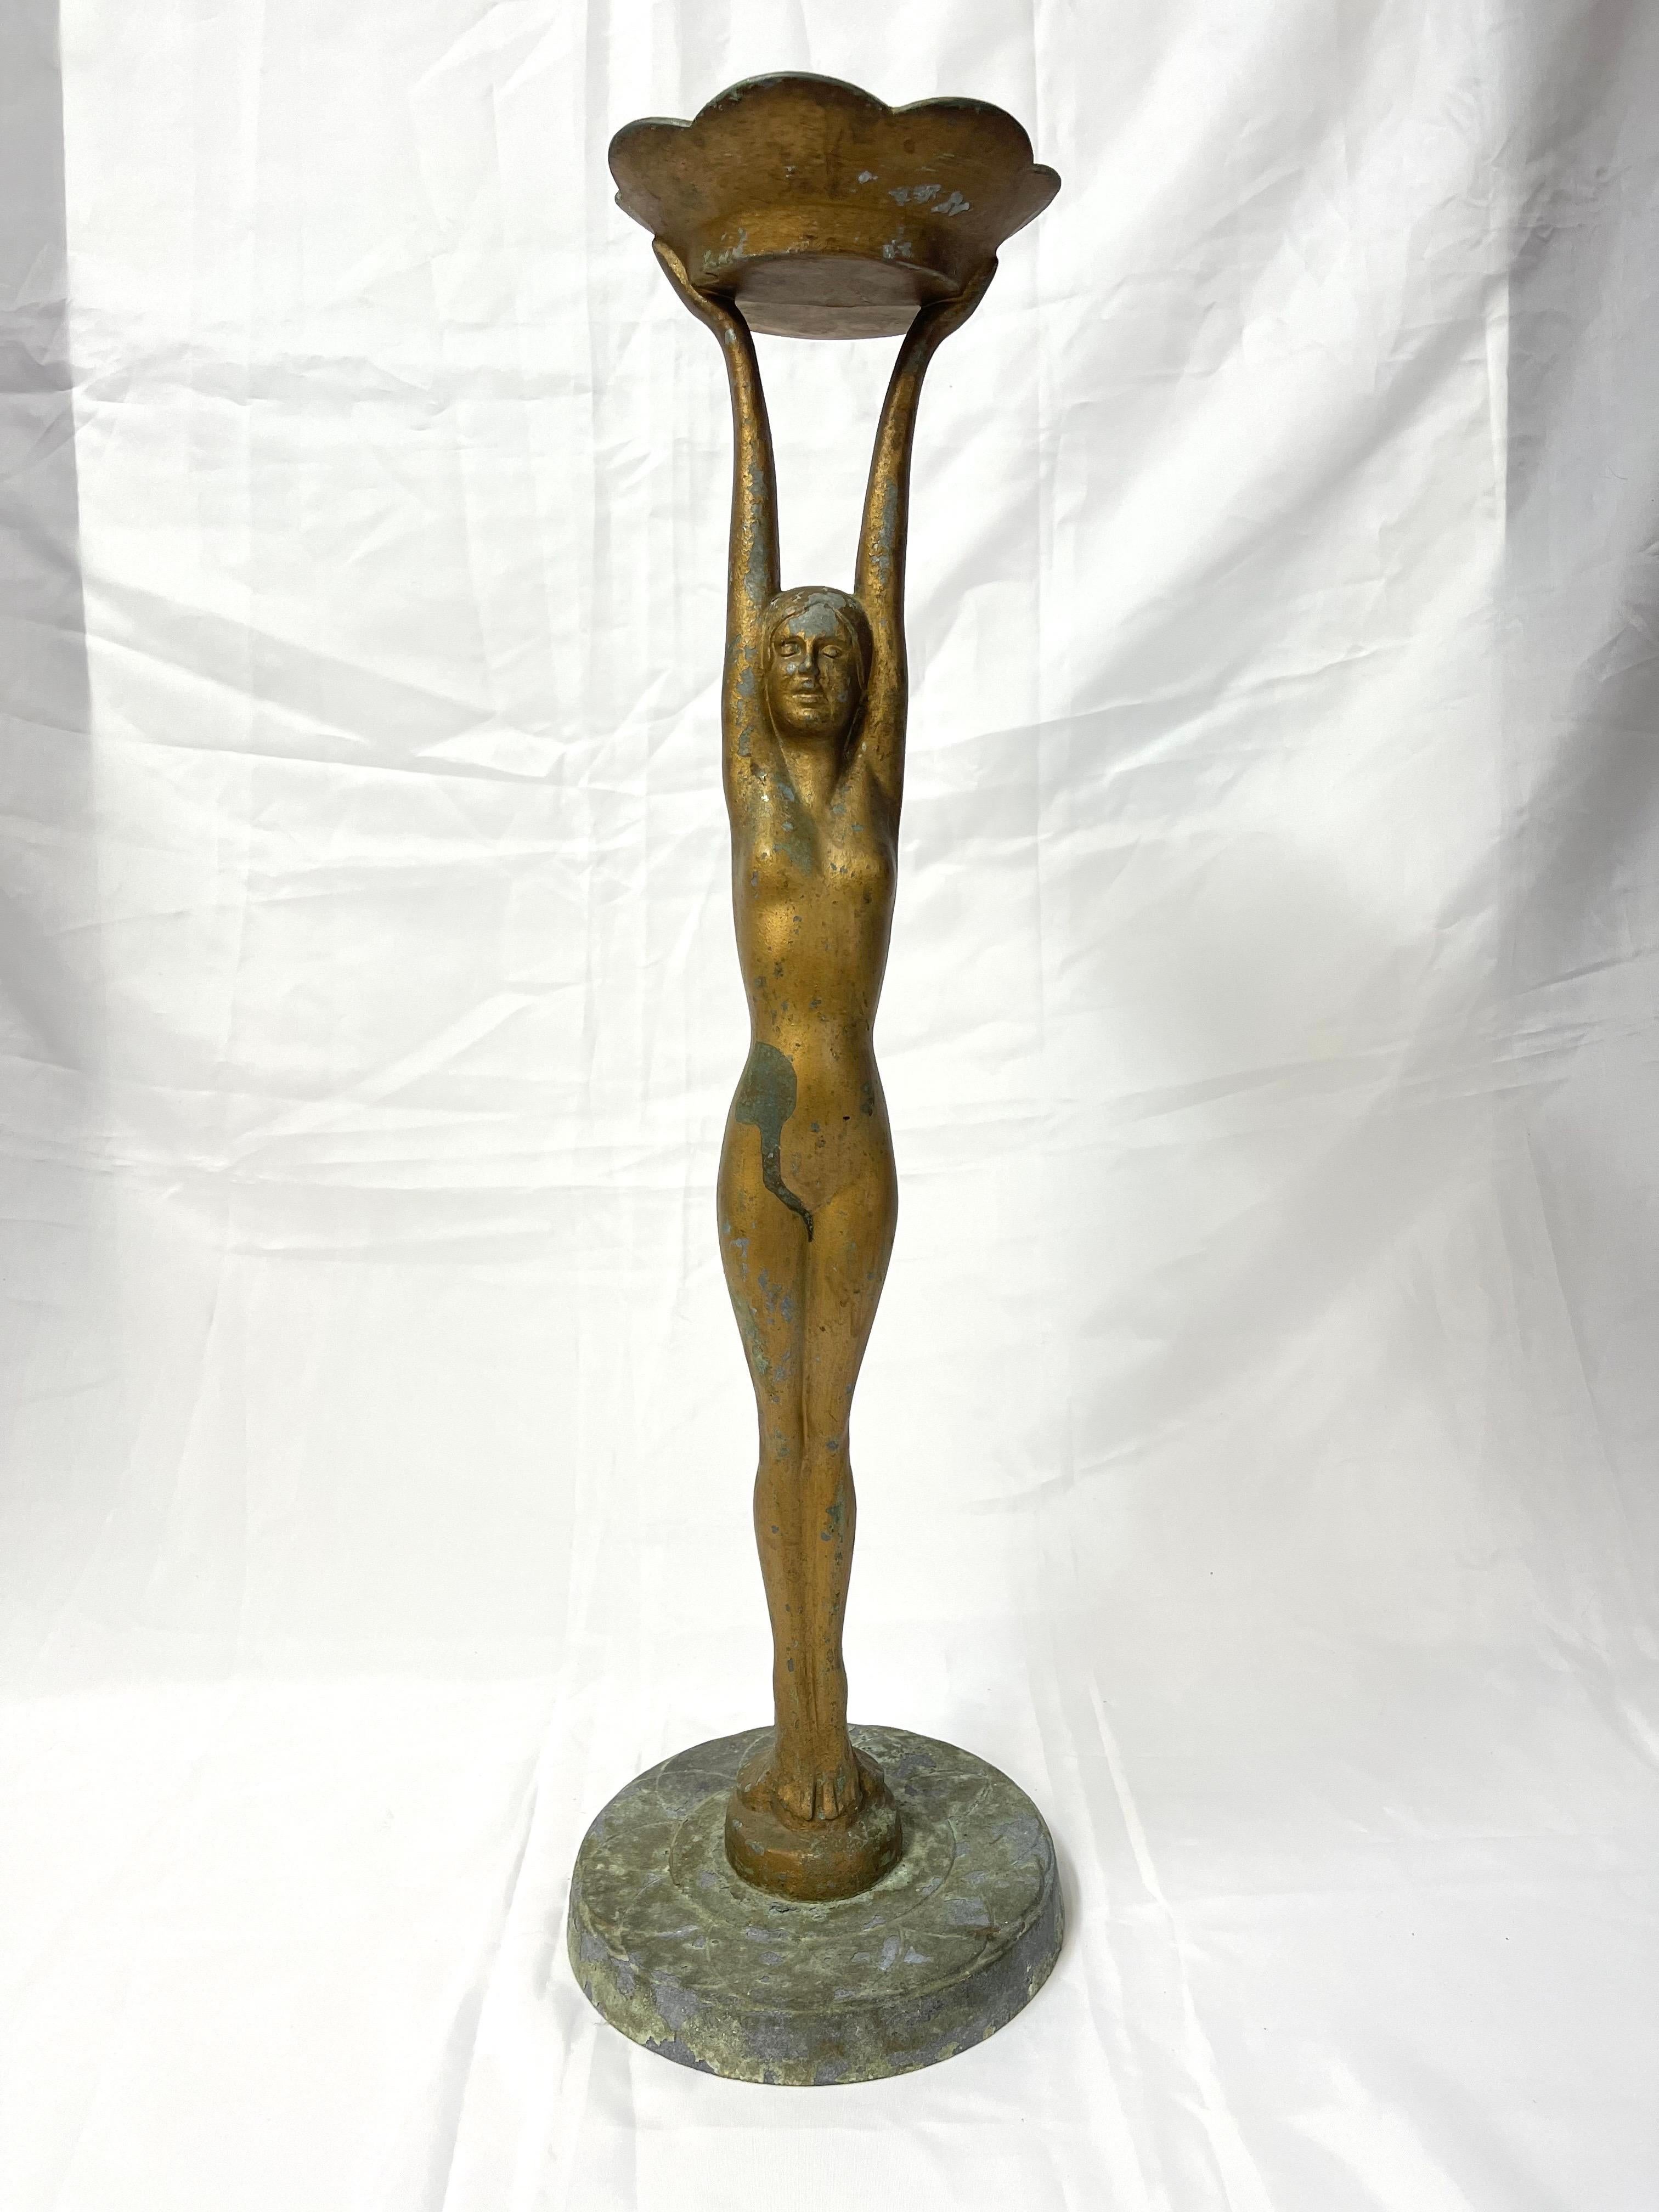 Art Deco Nude Smoking Stand Signed Frankart Inc. Classic item, use as a smoking stand or as a plant stand or even as a martini stand. This stand has some weathered patina from use. Some staining and some pitting of the metal.
The design studio of